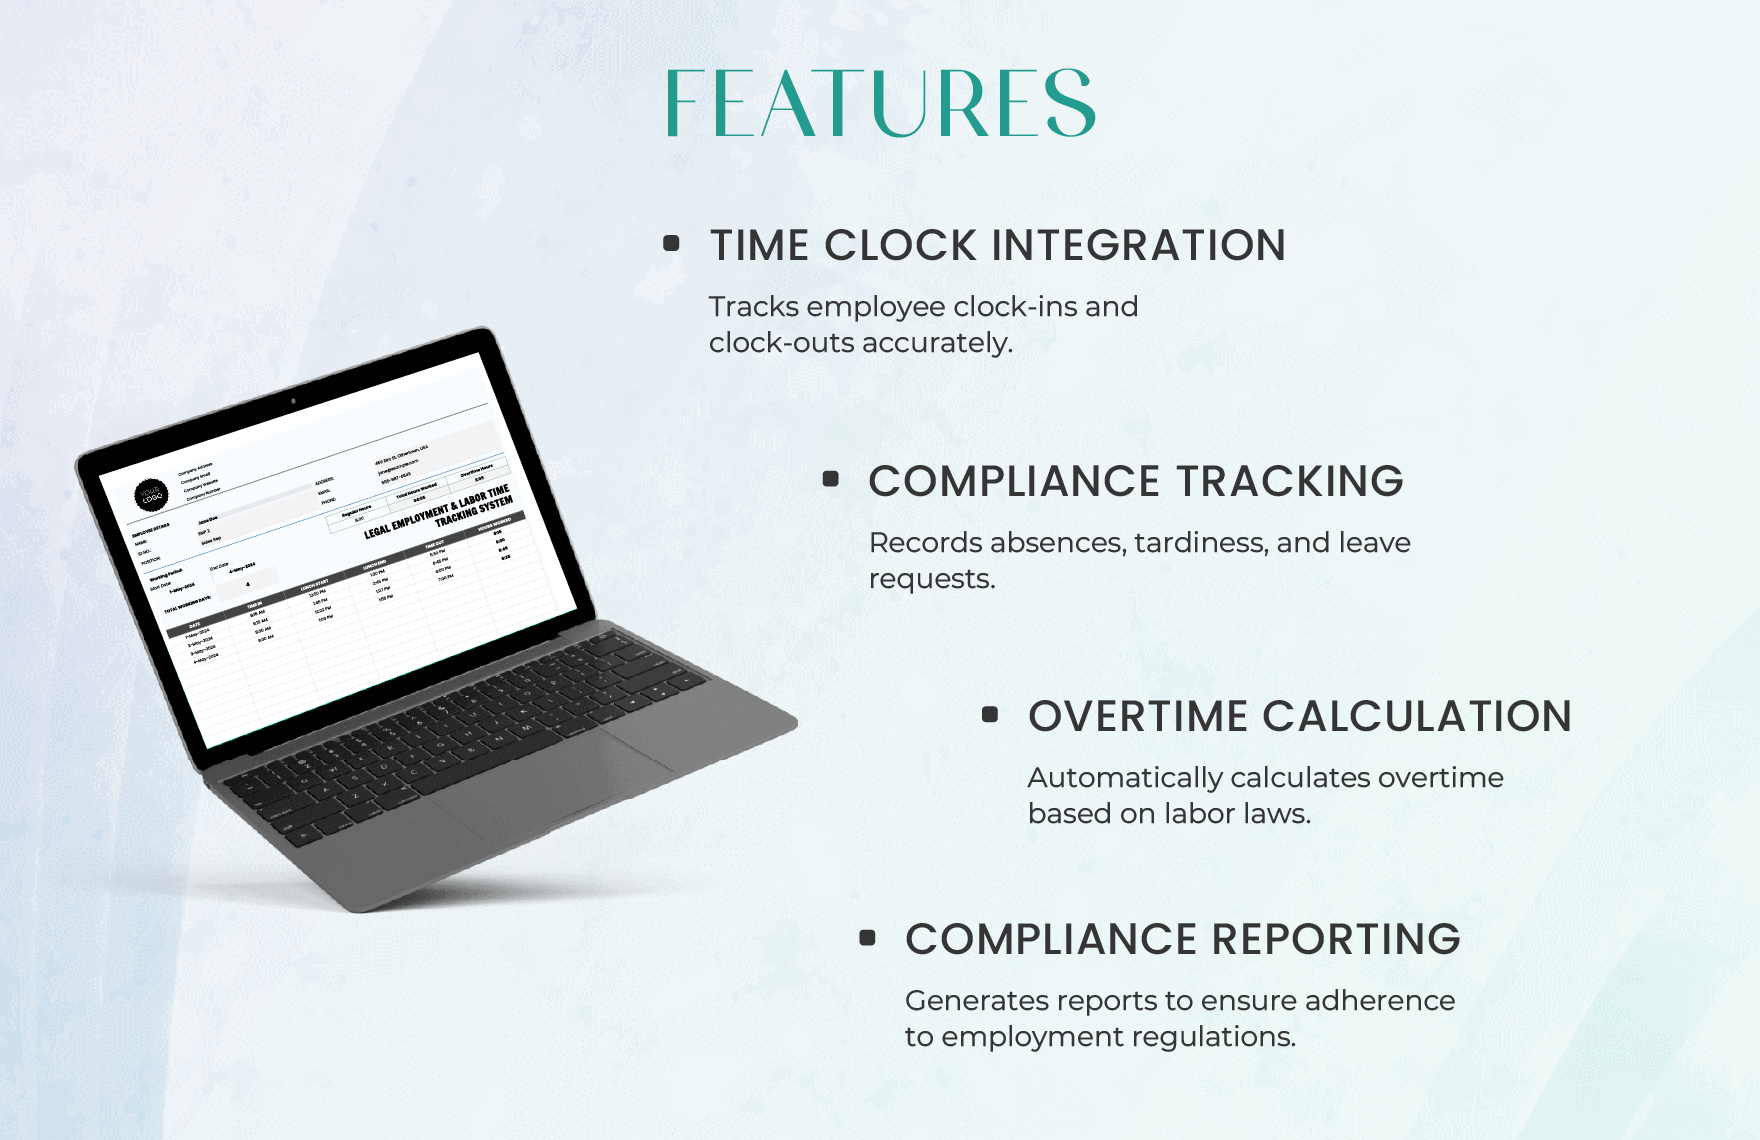 Legal Employment & Labor Time Tracking System Template